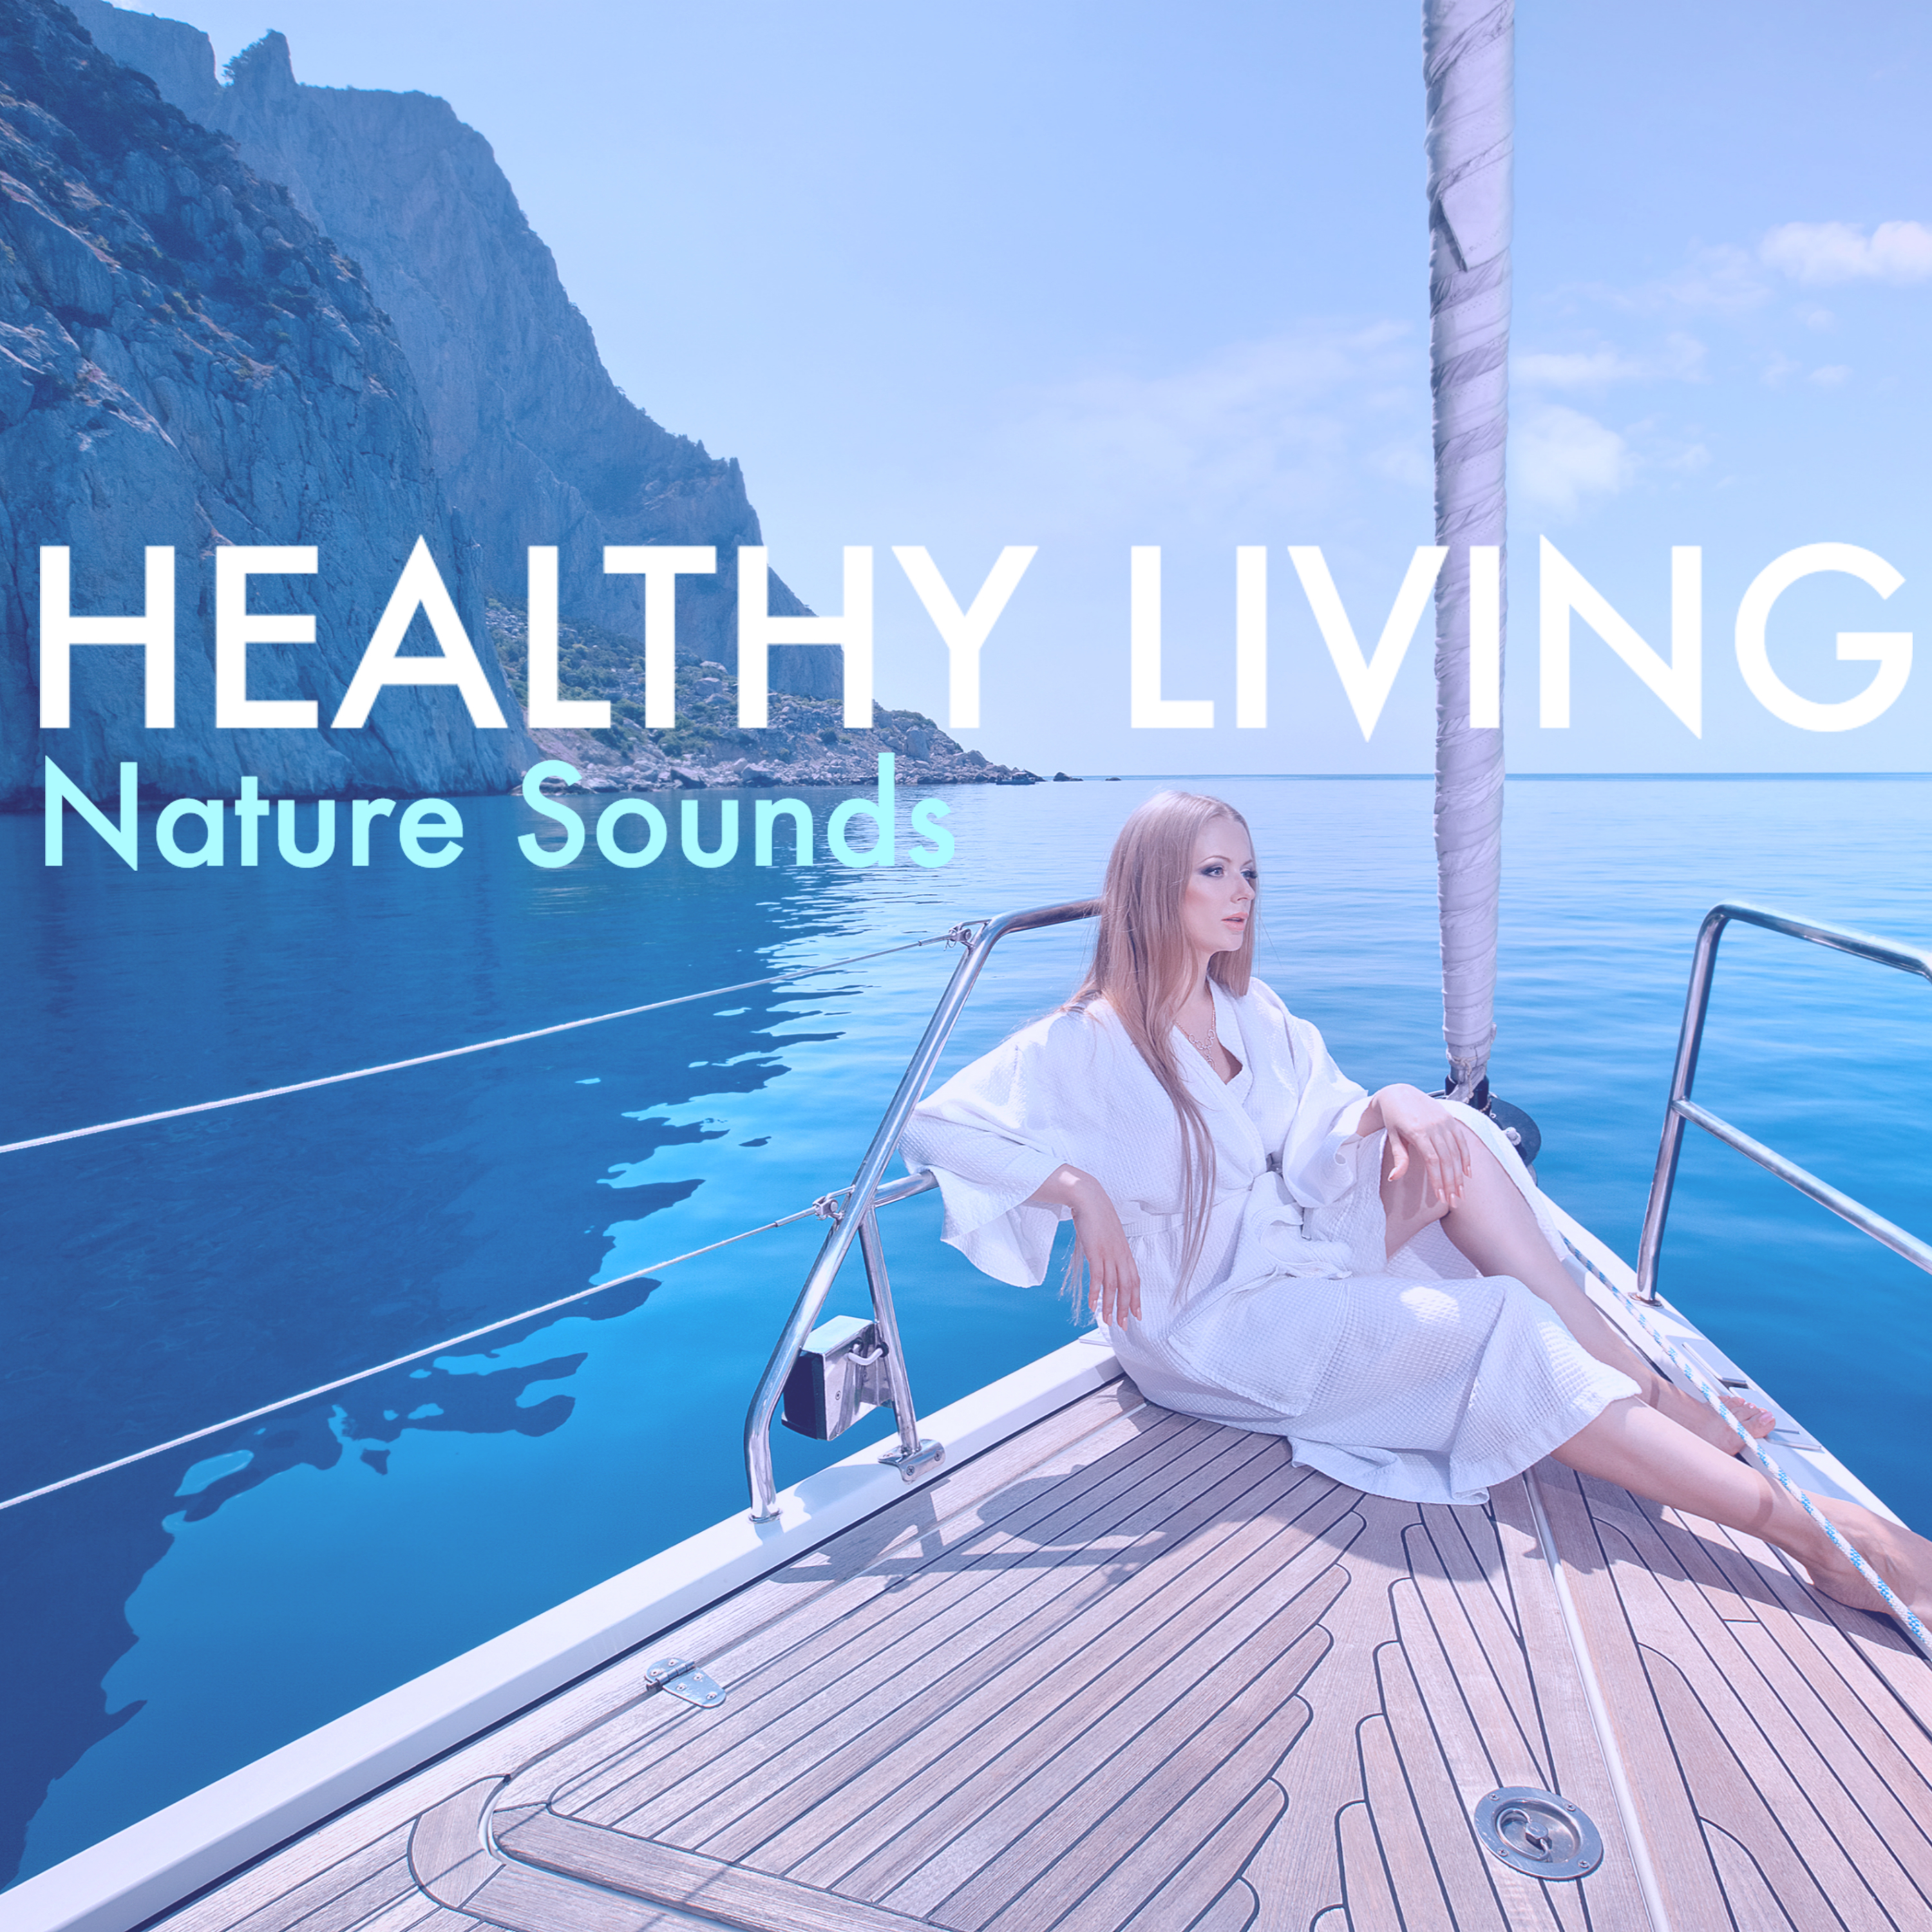 Relaxing Songs for Spa – Soft Nature Sounds for Relaxation, Healing, Sleep, Wellness, Pure Massage, Soothing Water, Gentle Piano, Stress Relief